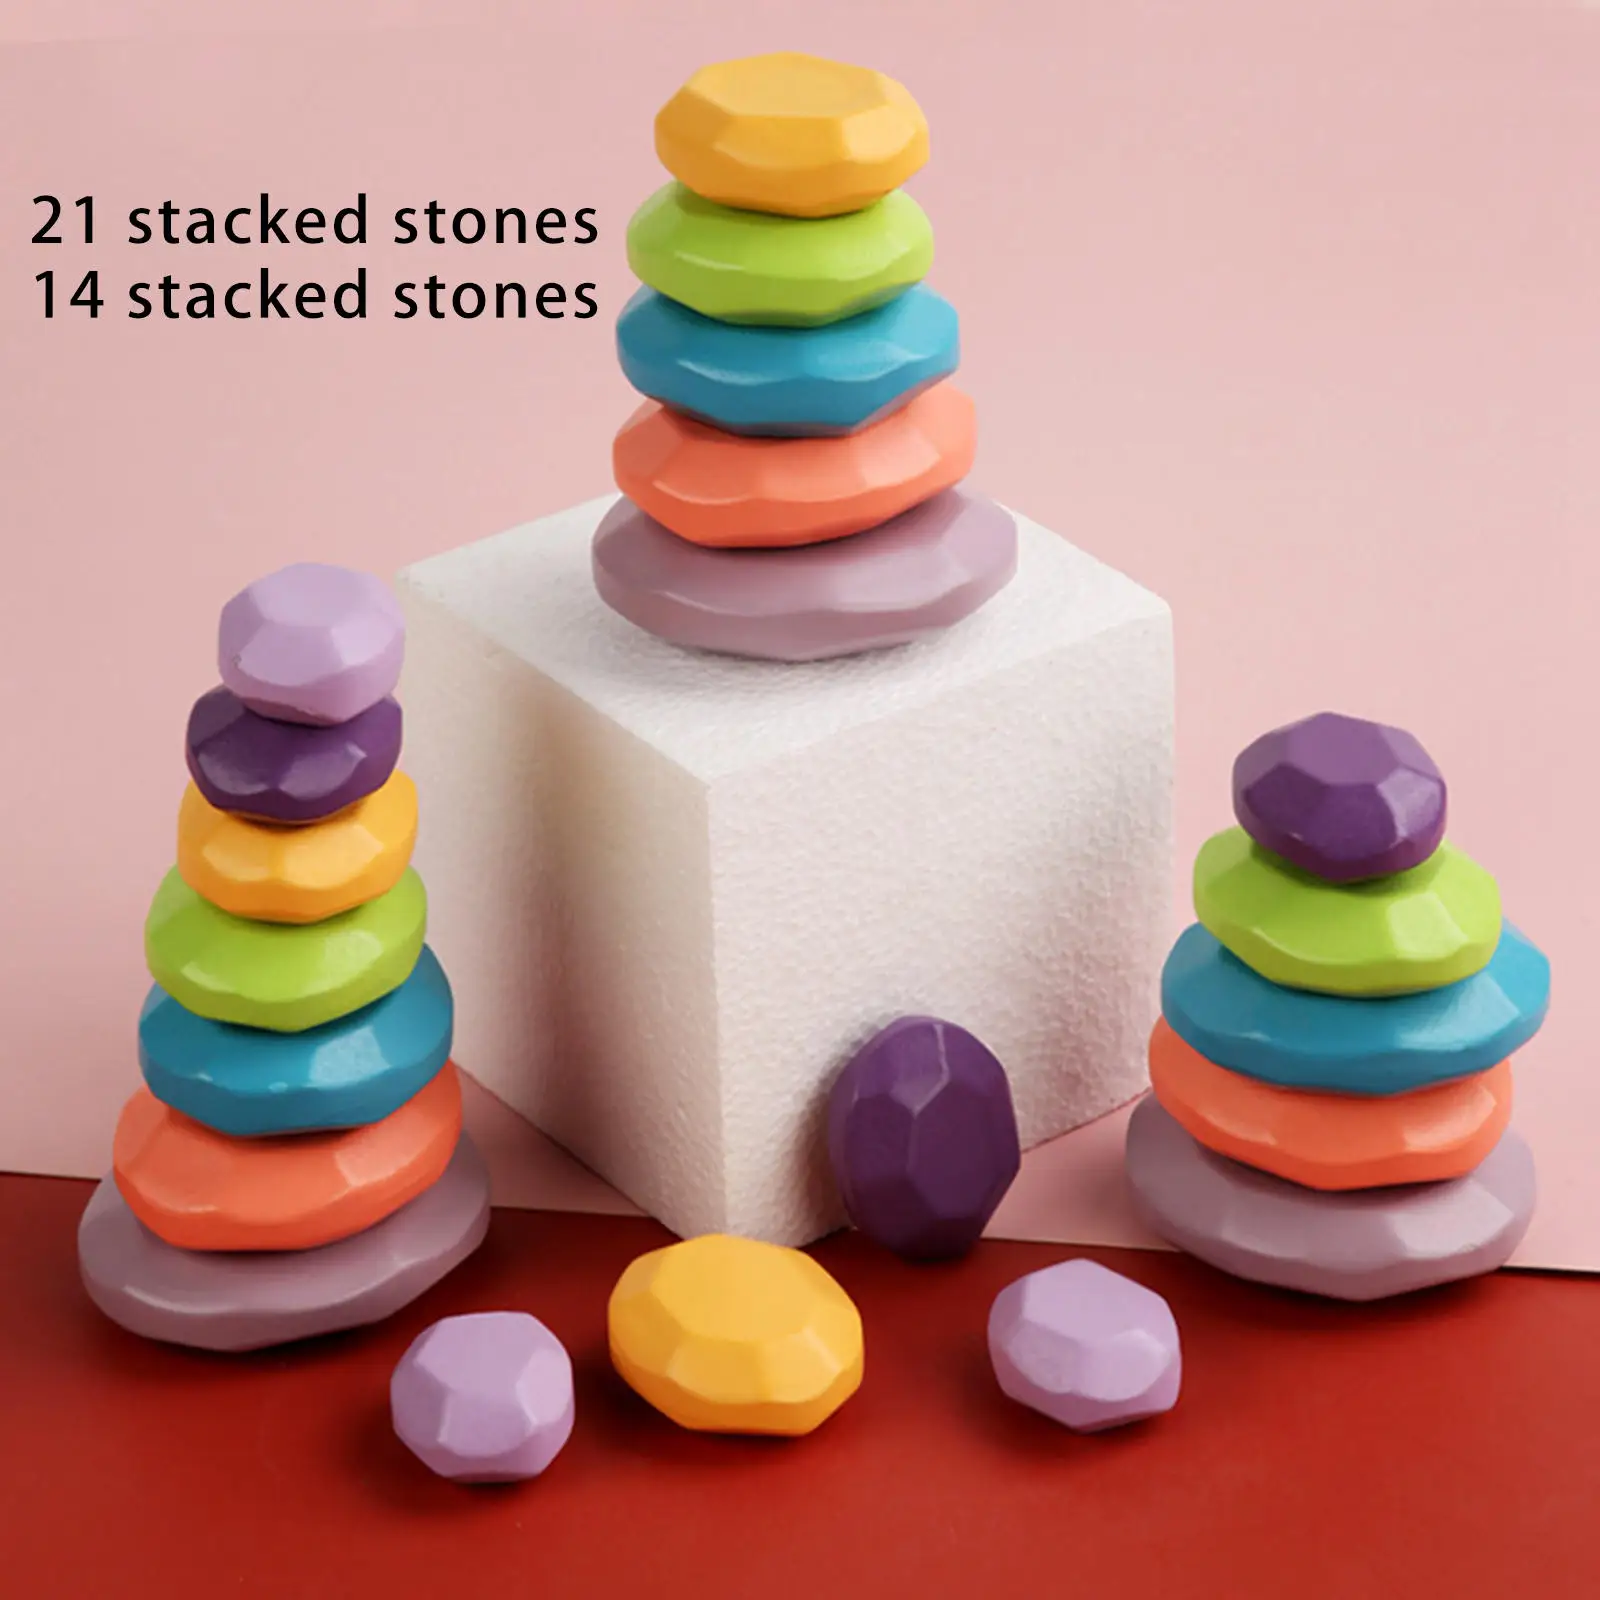 Wooden Toy Colorful Stacking Stone Building Block Creative Educational Toy Rainbow Stone Children Wooden Toy